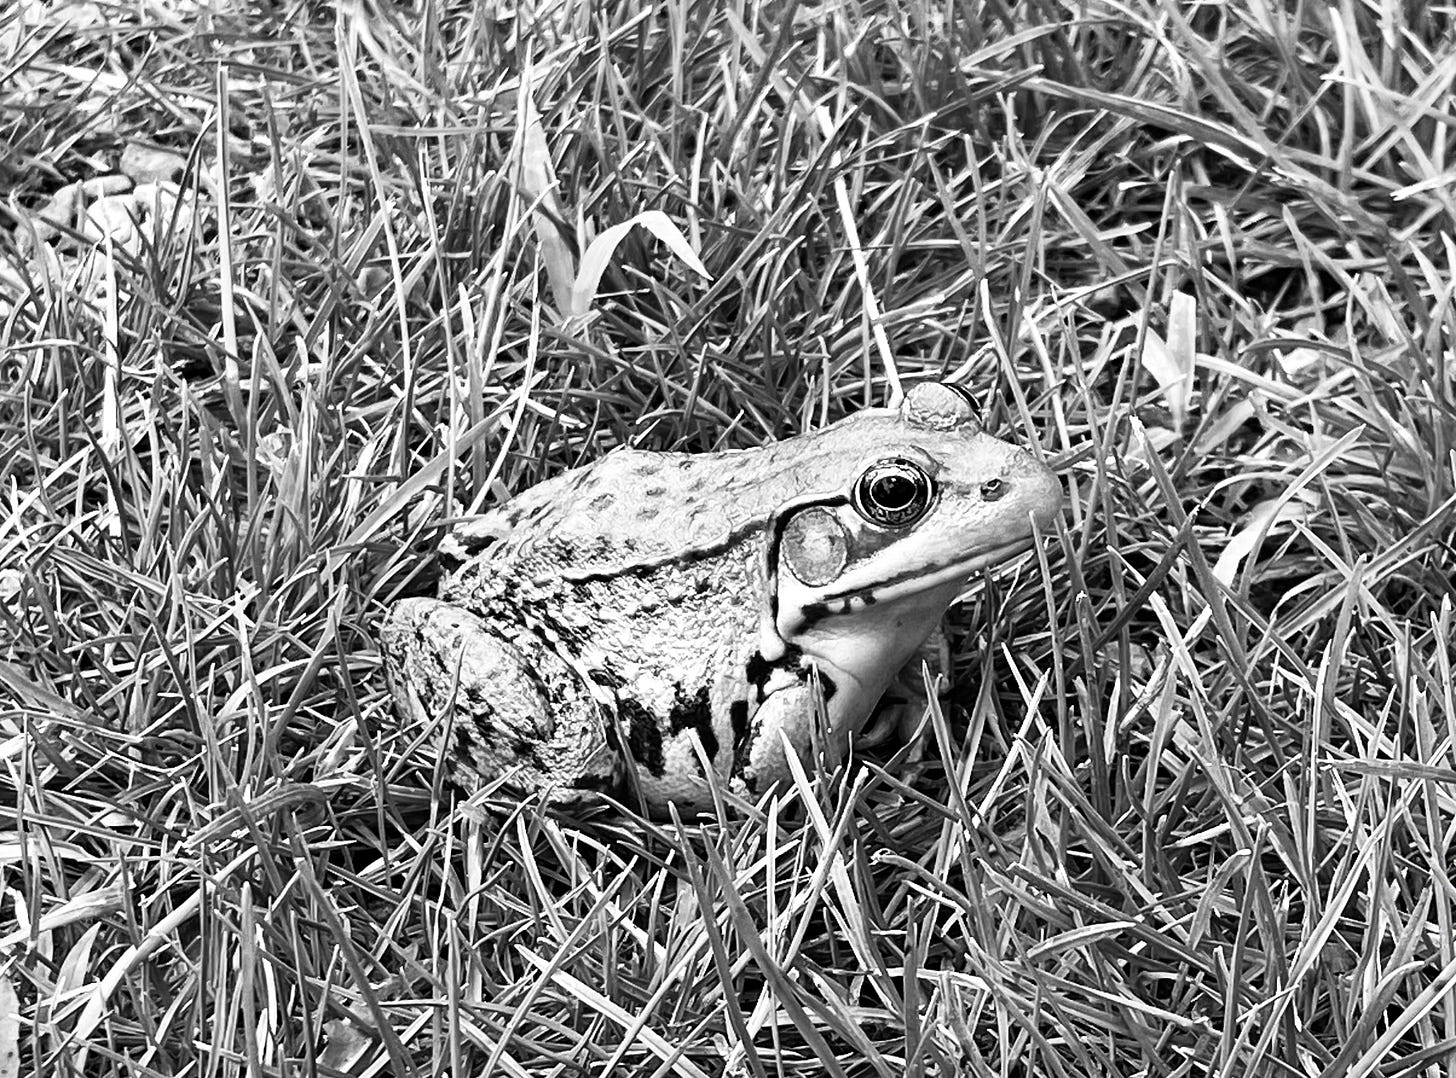 Black and white photo of a small frog in the grass